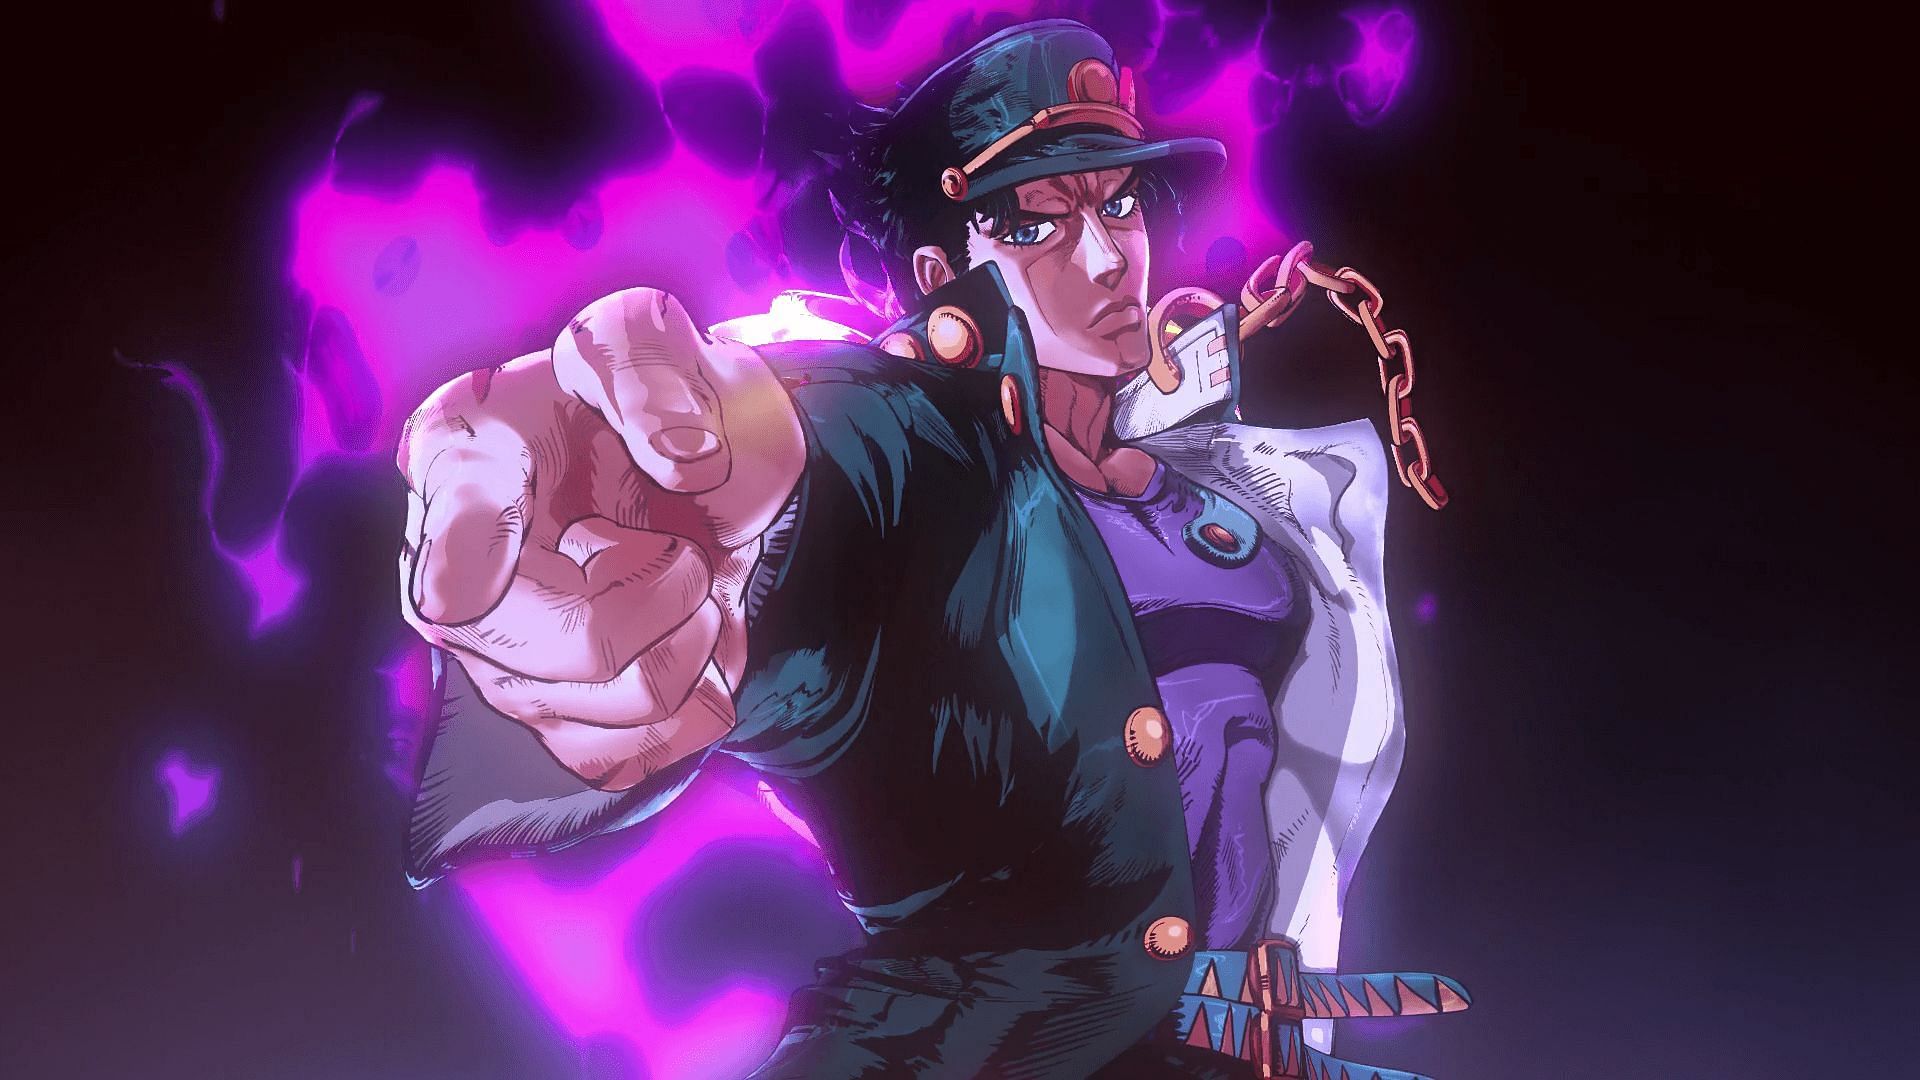 Jotaro Kujo has a special ability called the Star Platinum Iimage via David productions)